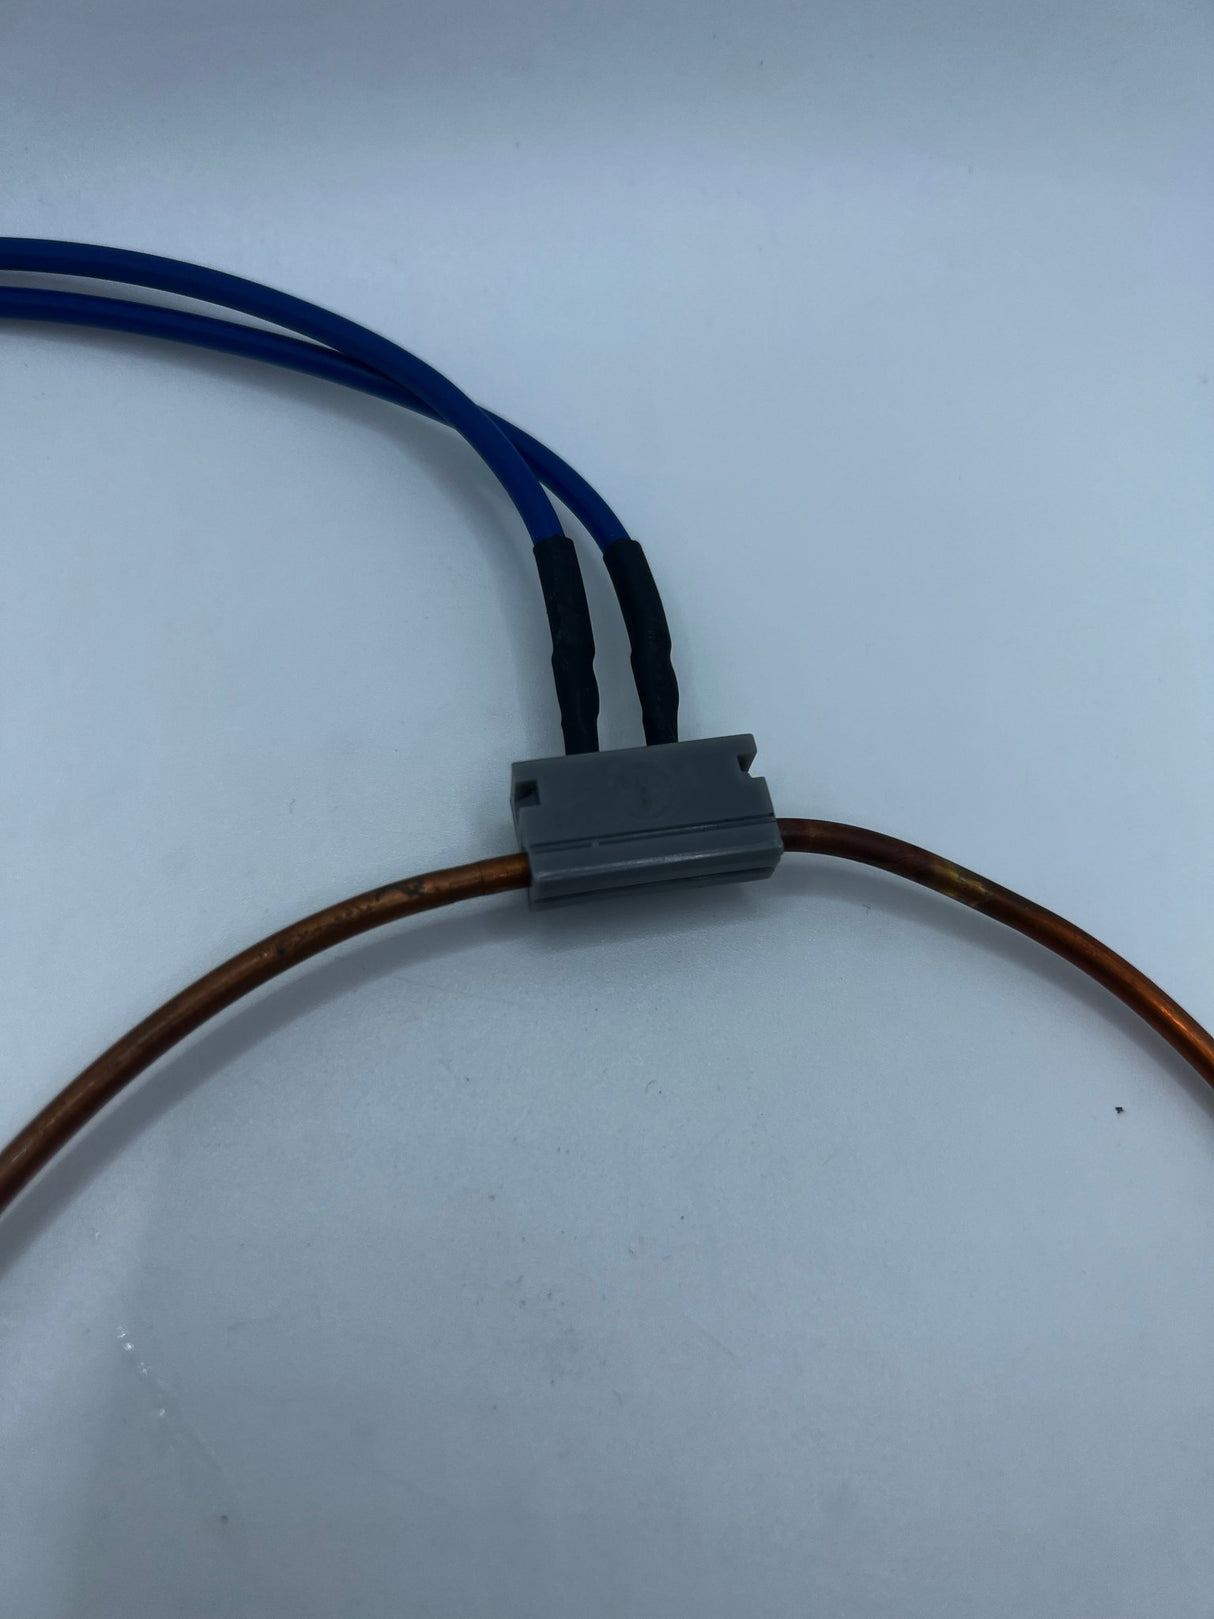 Commercial Thermocouple 600mm with Interrupter 0.270.436 SI0270436 - My Oven Spares-Commercial-SI0270436-4